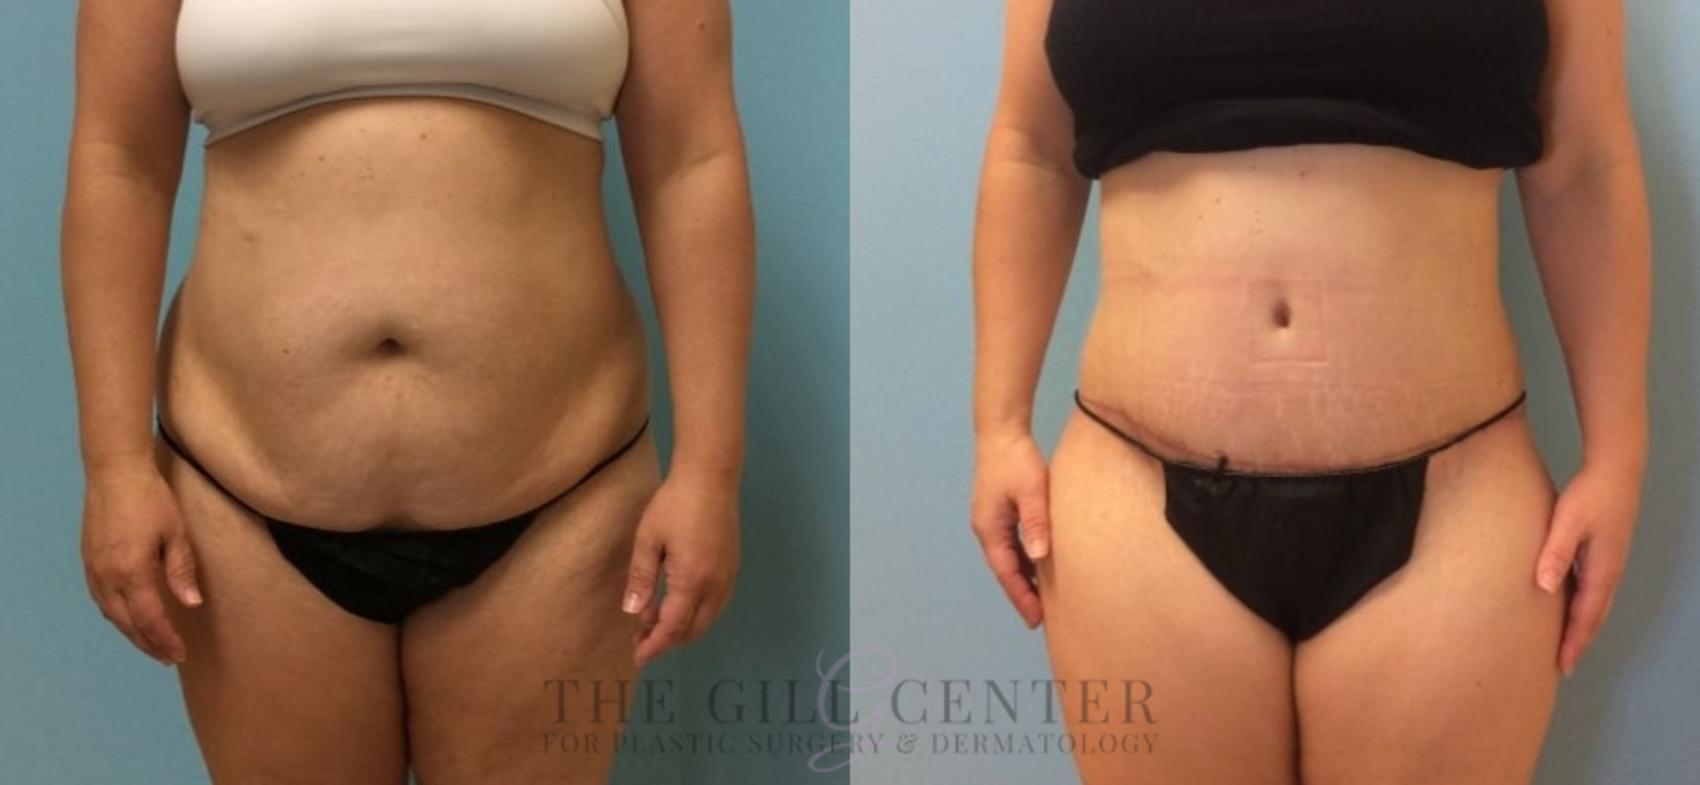 Tummy Tuck Case 442 Before & After Front | The Woodlands, TX | The Gill Center for Plastic Surgery and Dermatology